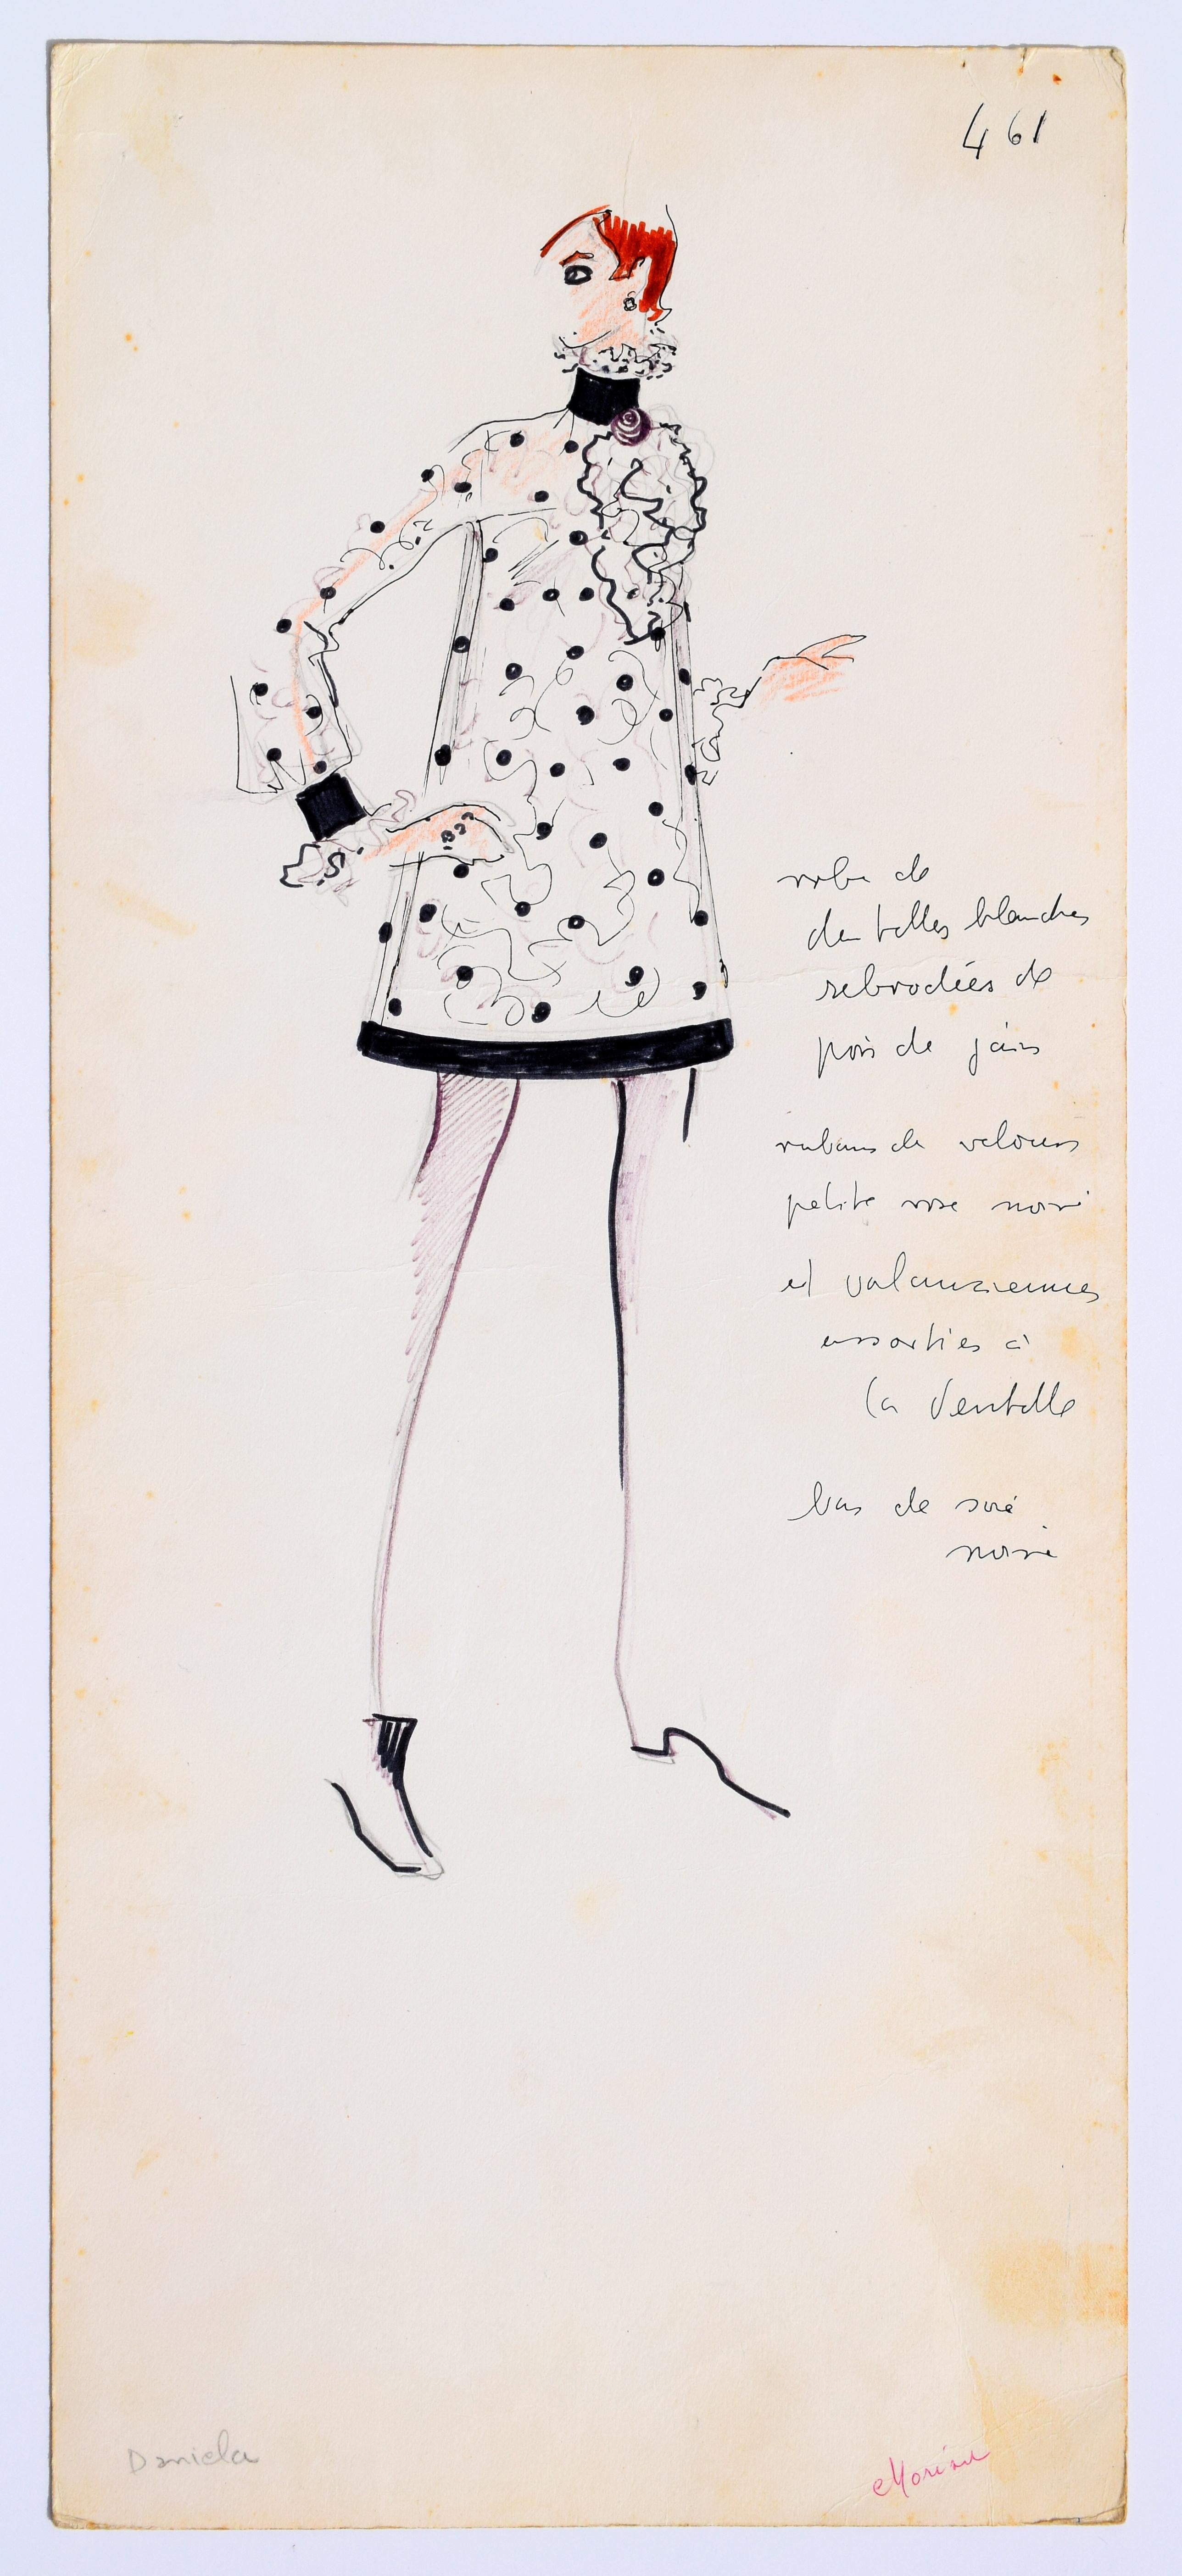 Original fashion design sketches by Karl Lagerfeld, from storage box labeled 